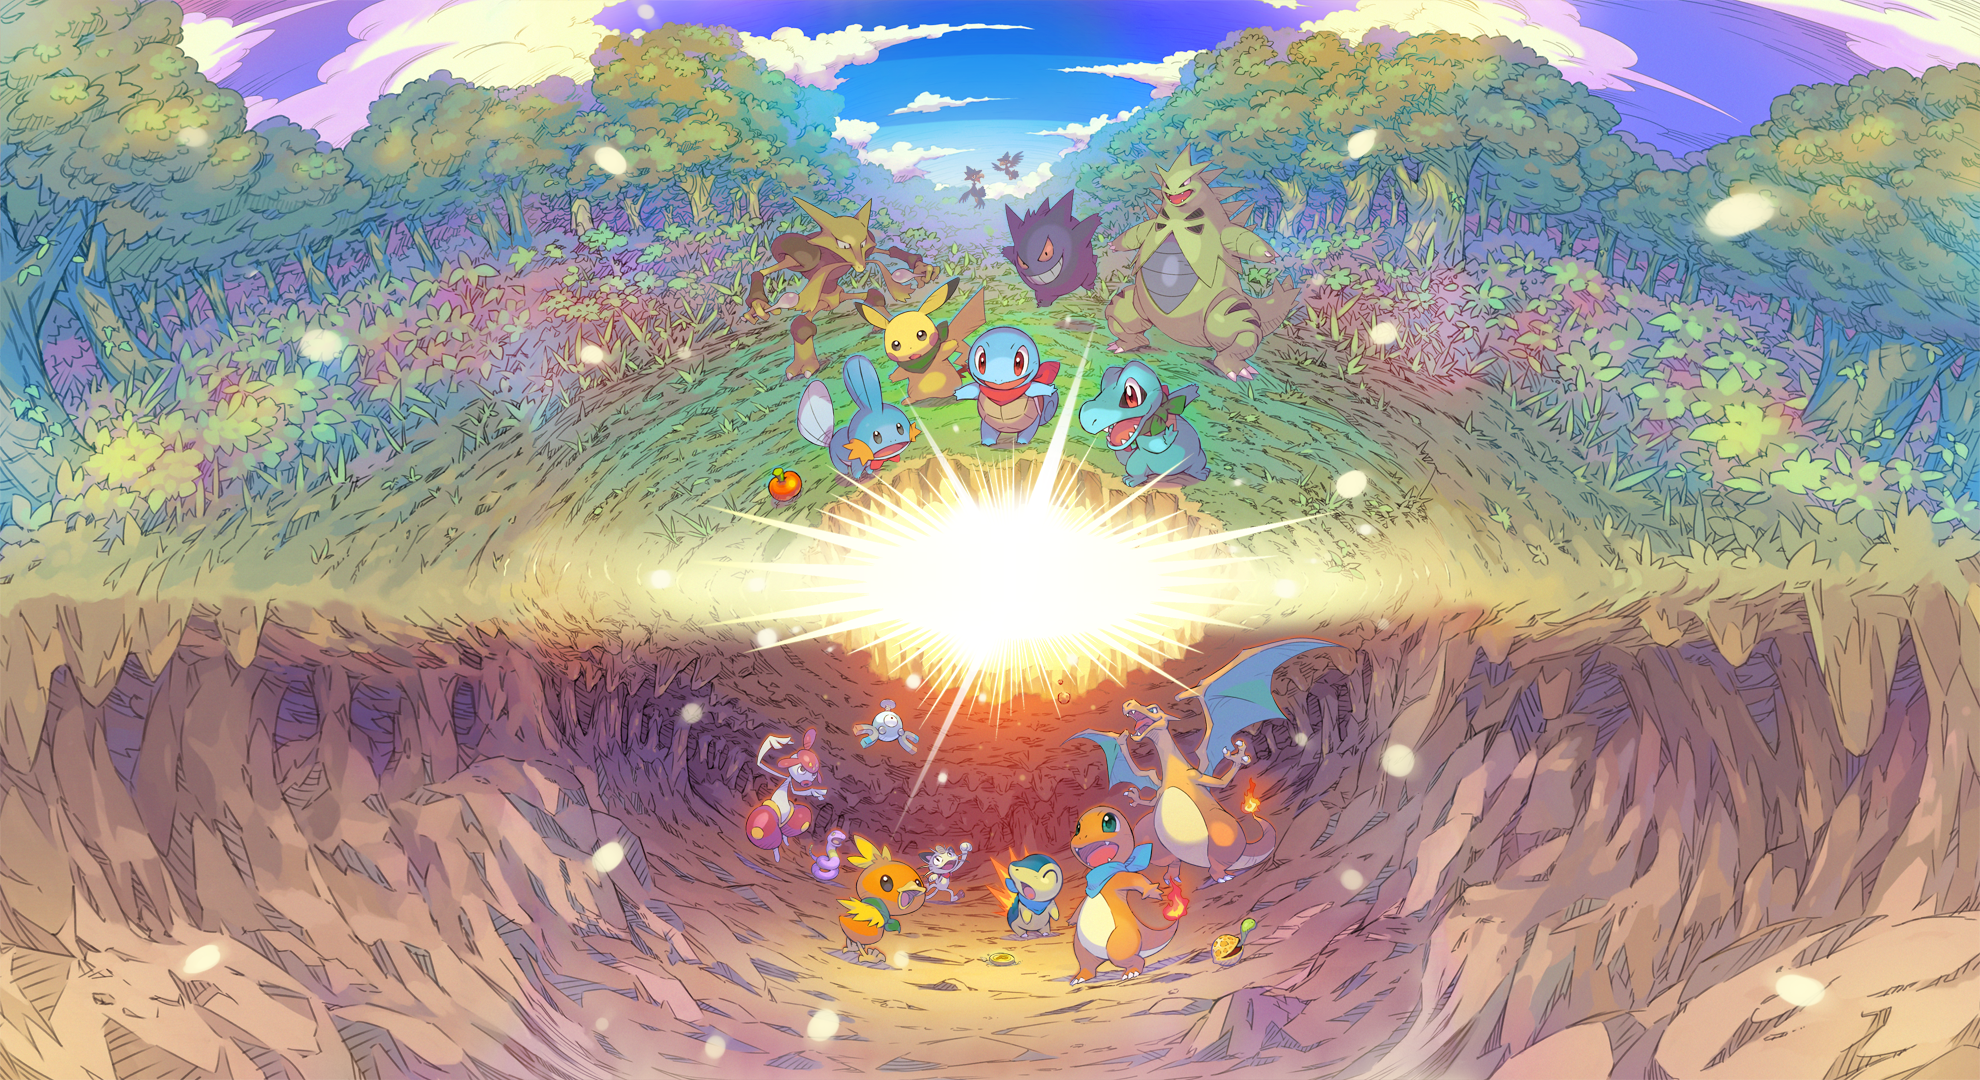 Anime 1980x1080 Pokémon Mystery Dungeon Pikachu forest cave Charizard Squirtle Totodile Mudkip Torchic  Charmander Pokémon anime